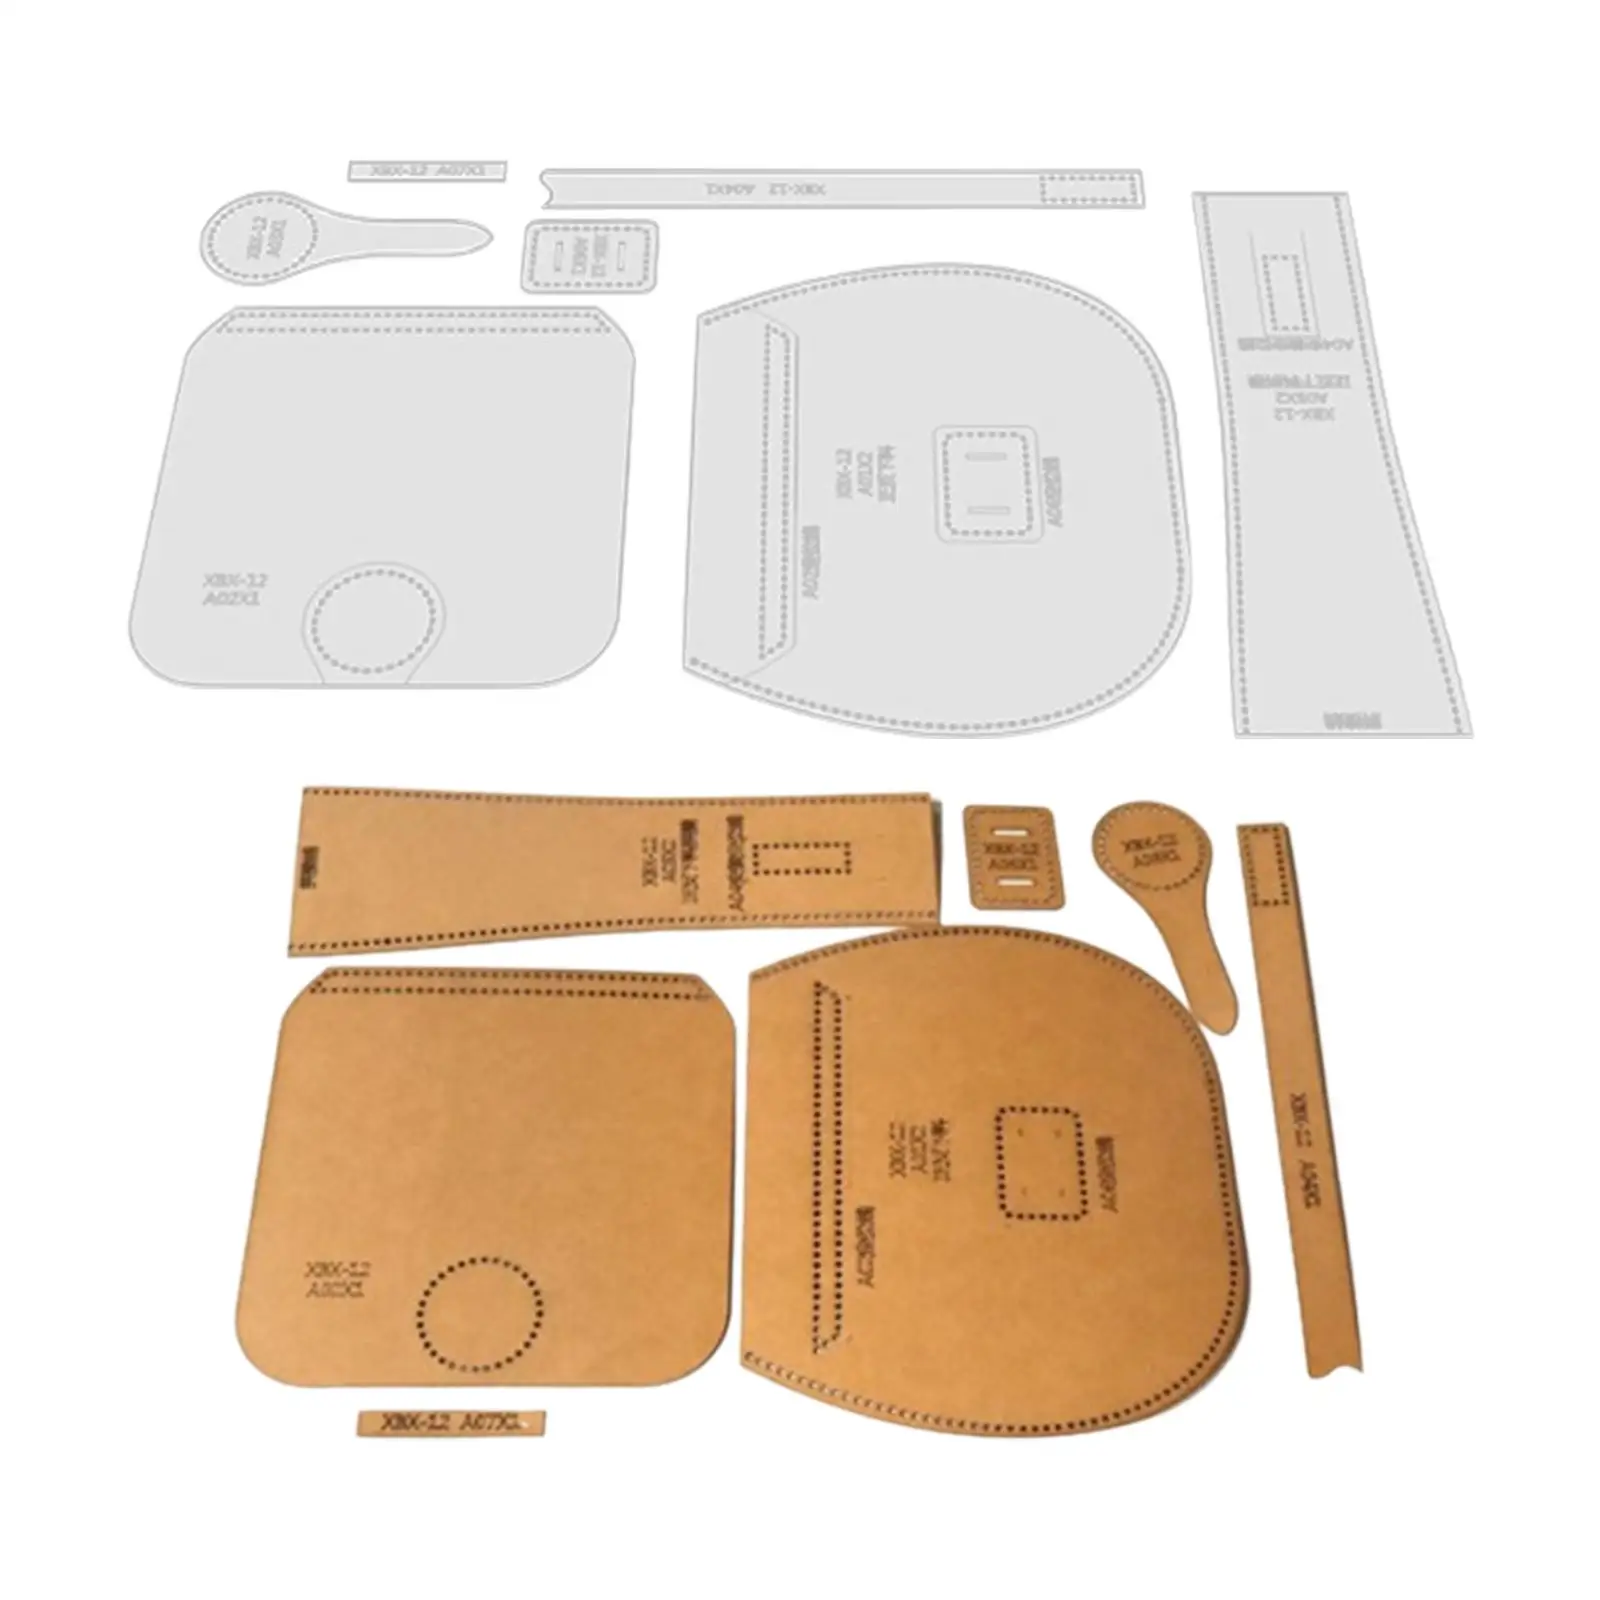 7x Leather Templates Patterns Bag Templates Sewing Machine